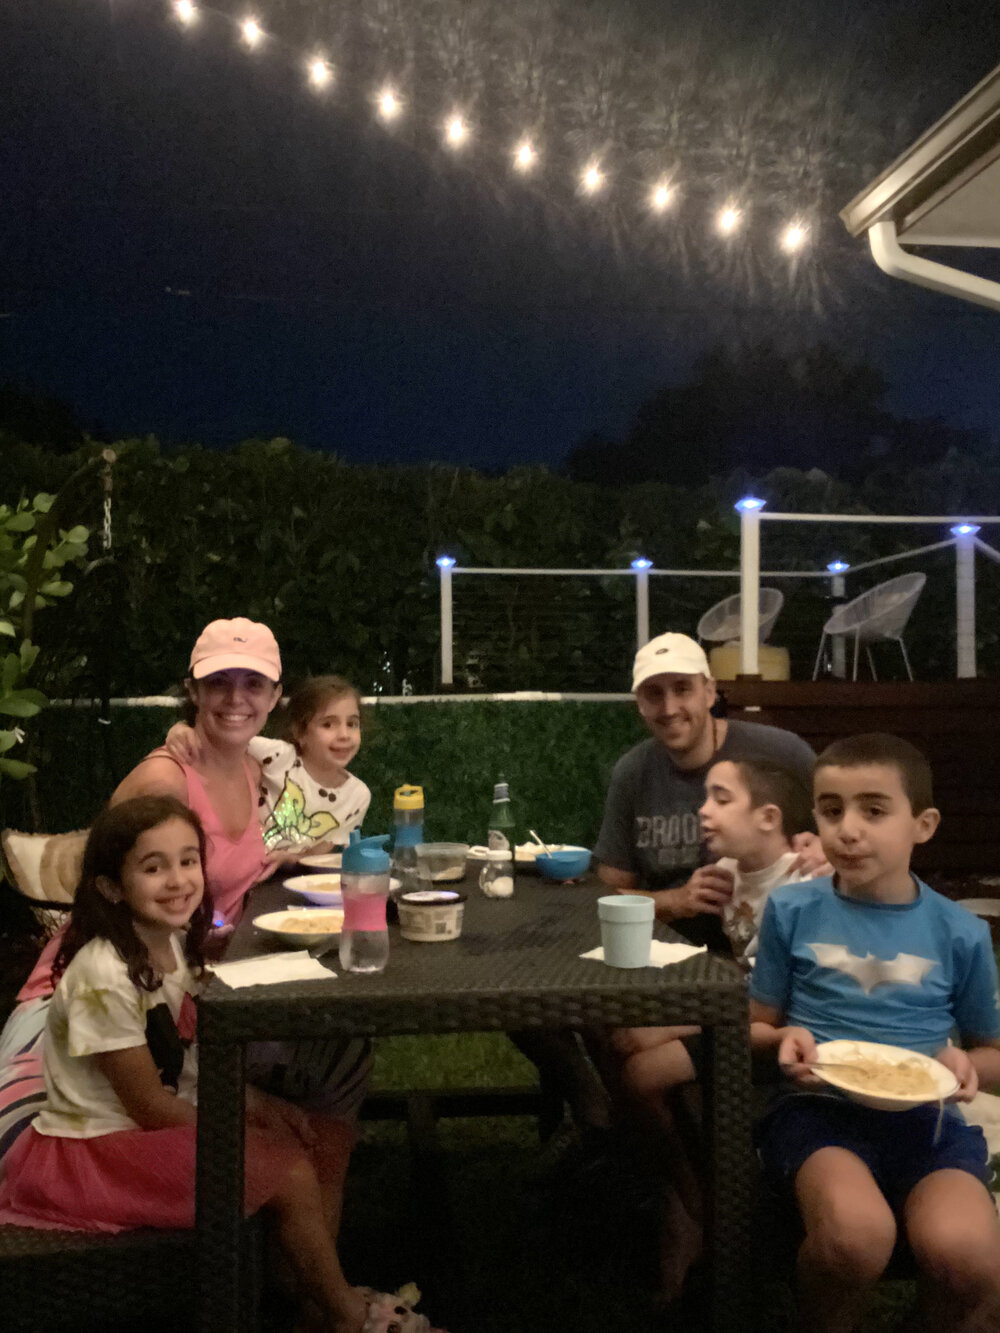 Enjoying our first outdoor family dinner in our newly design backyard